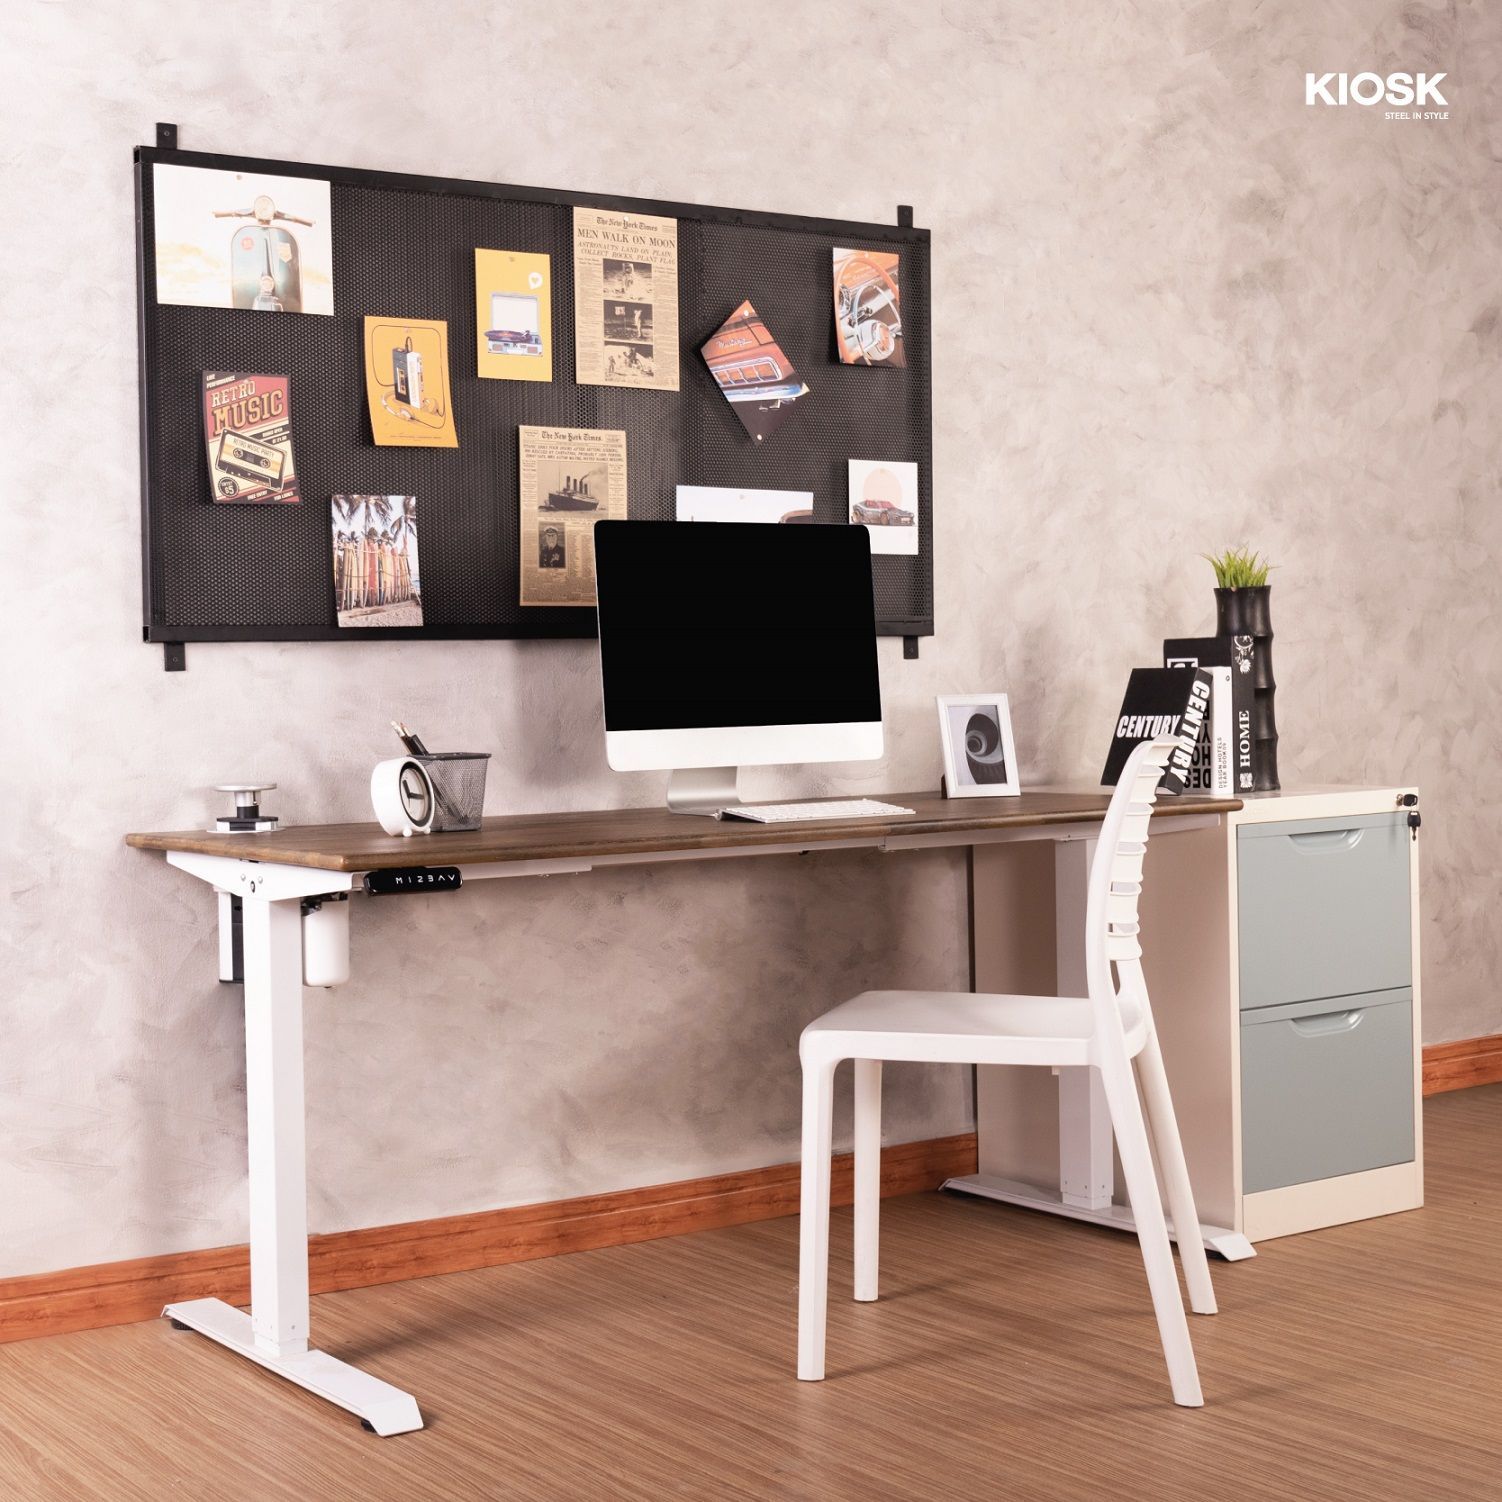 Electric Adjustable Desk with Acasia Wood Top and Socket 160 cm.